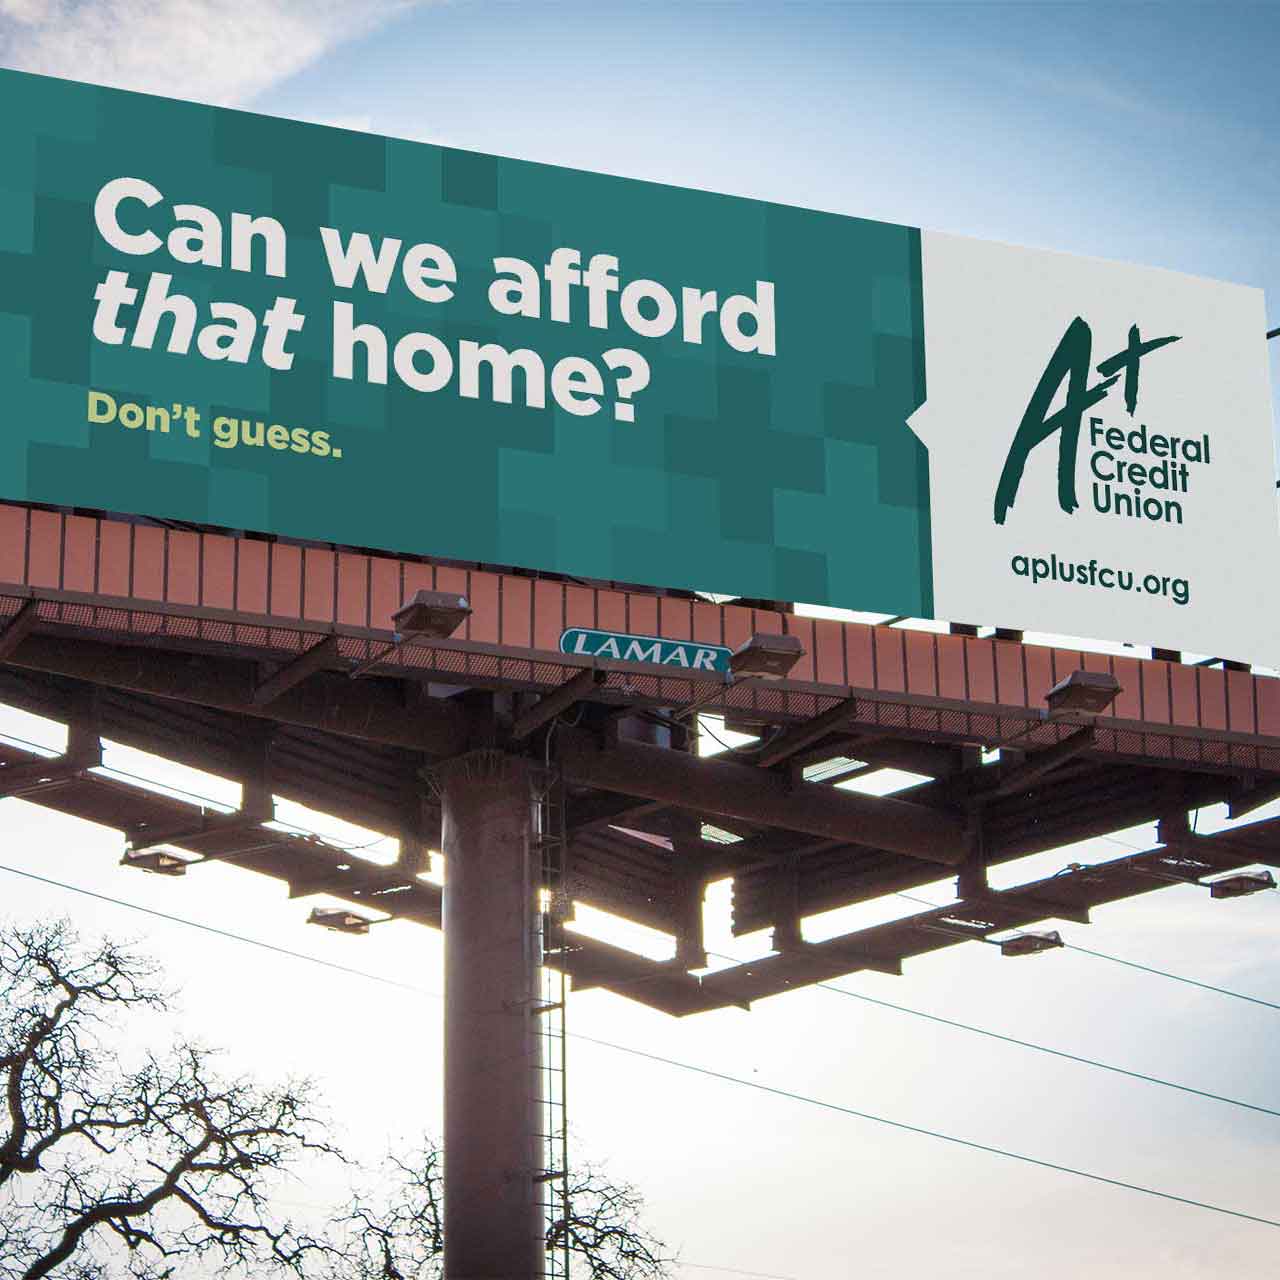 An outdoor advertisement (bulletin) for A+ Federal Credit Union by Tilted Chair reading “Can we afford that home? Don‘t Guess.”